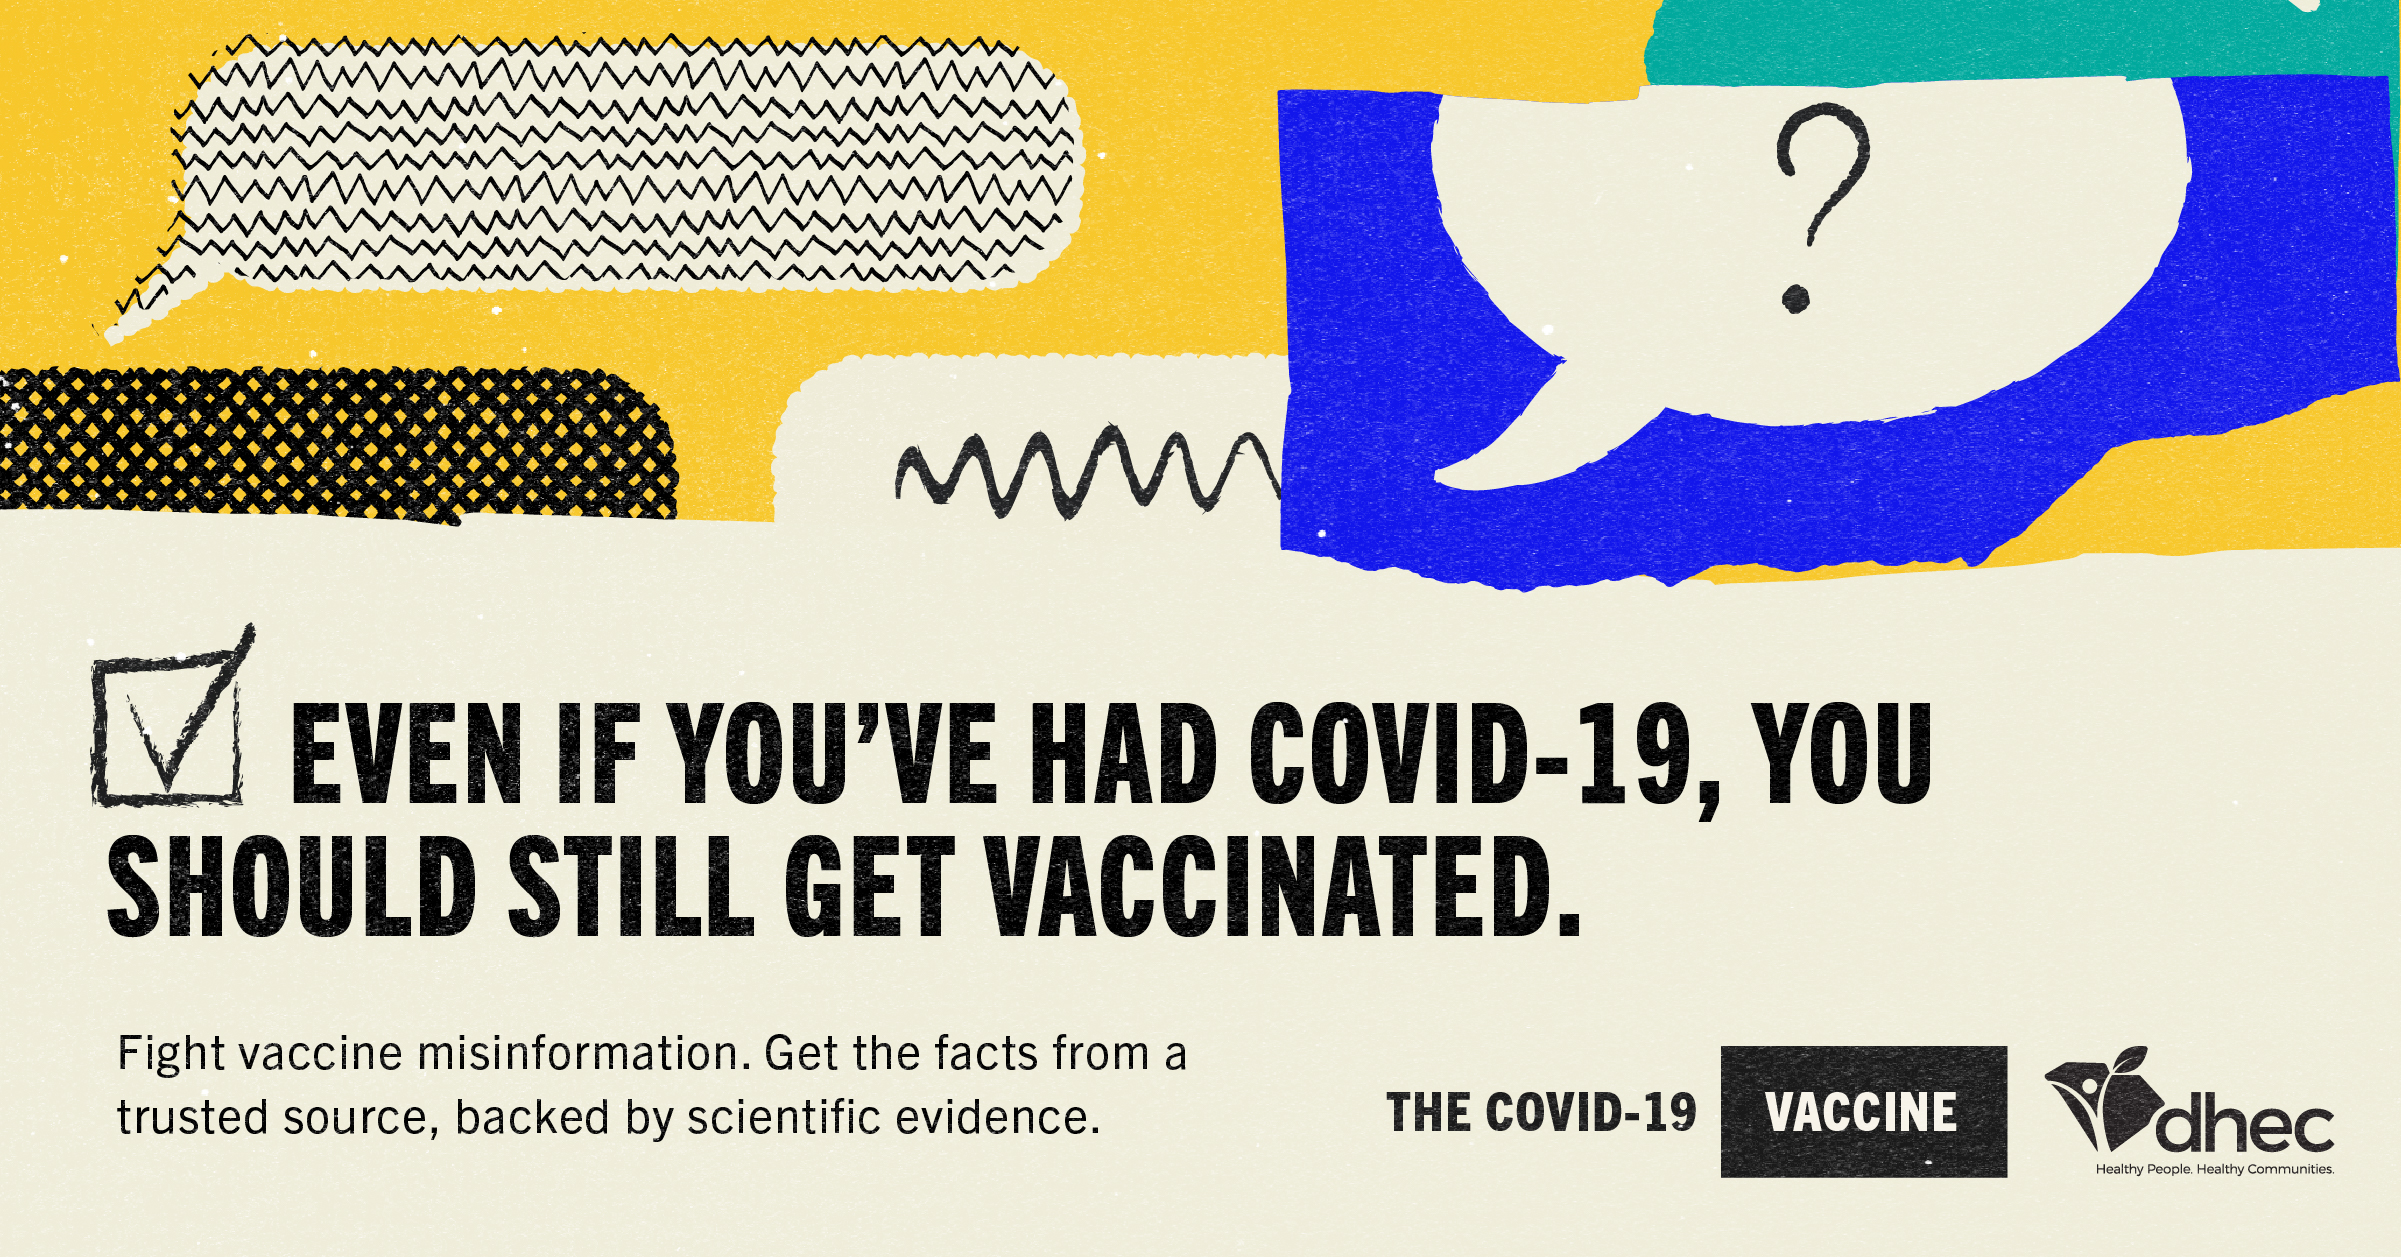 Even if you've had COVID-19, you should still get vaccinated.